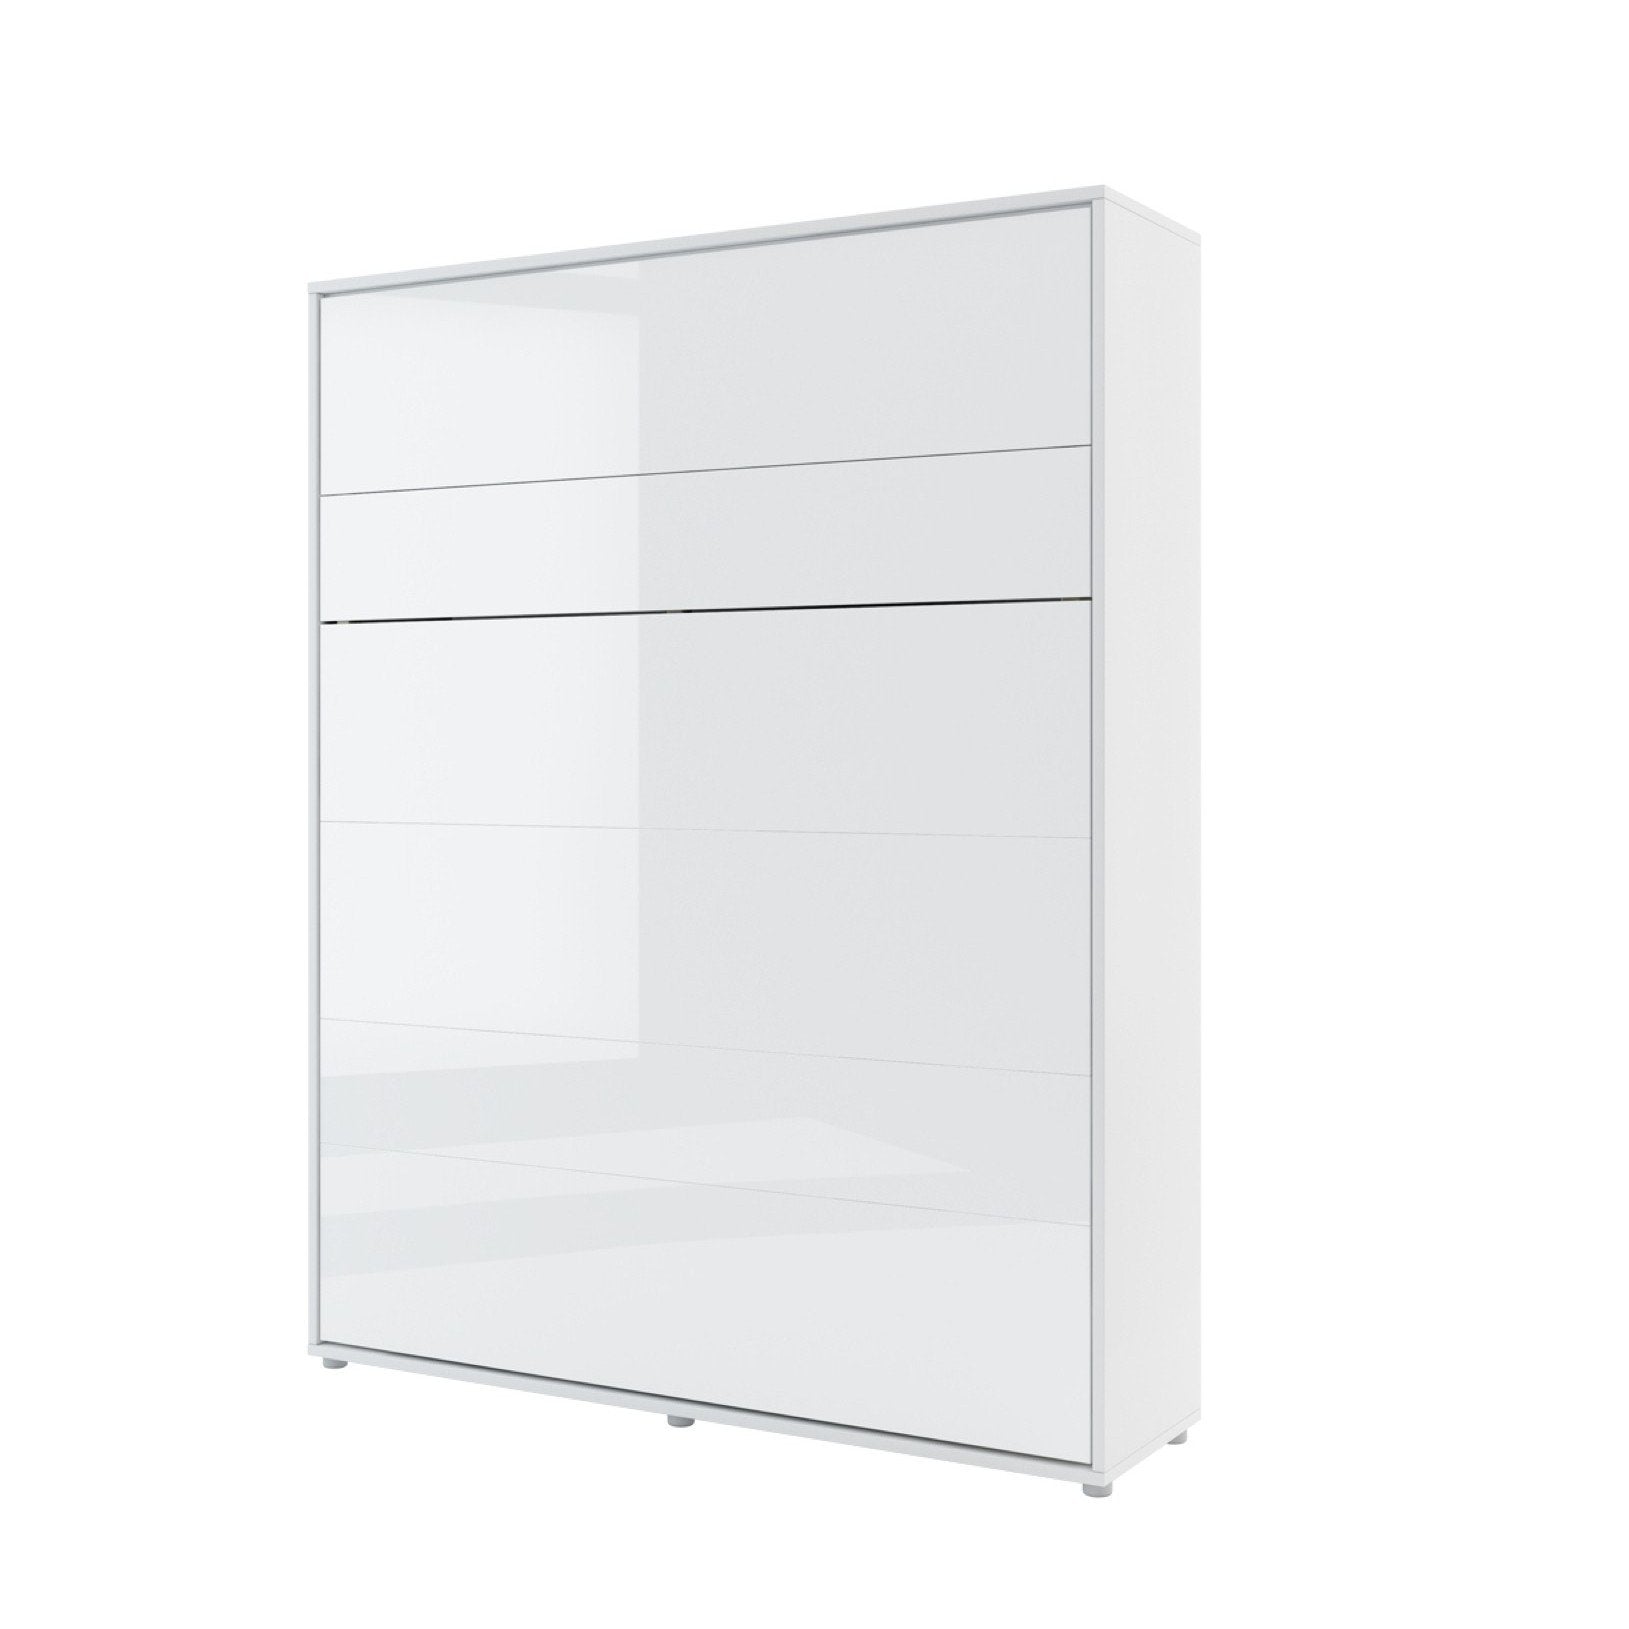 BC-12 Vertical Wall Bed Concept 160cm White Gloss Wall Bed 